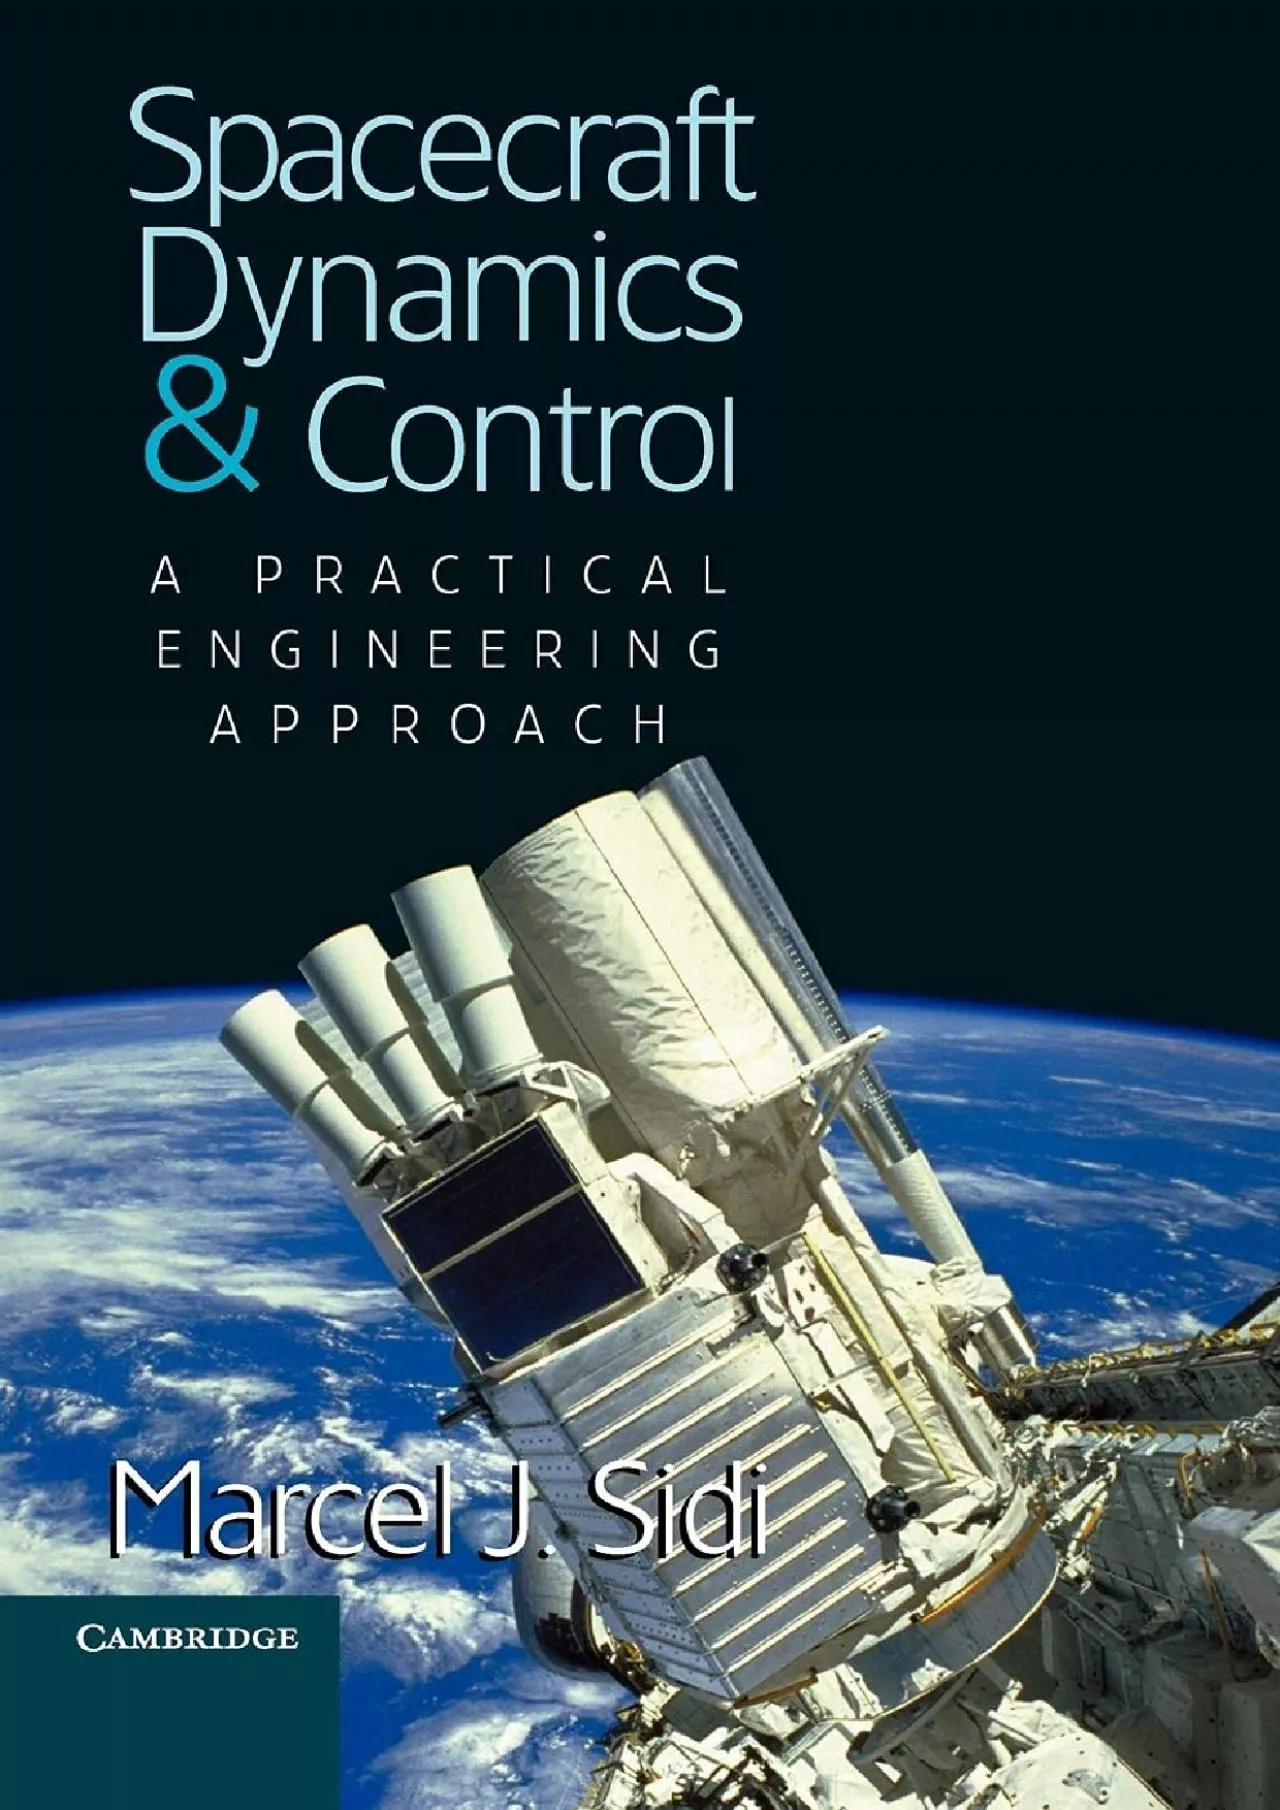 (BOOK)-Spacecraft Dynamics and Control: A Practical Engineering Approach (Cambridge Aerospace